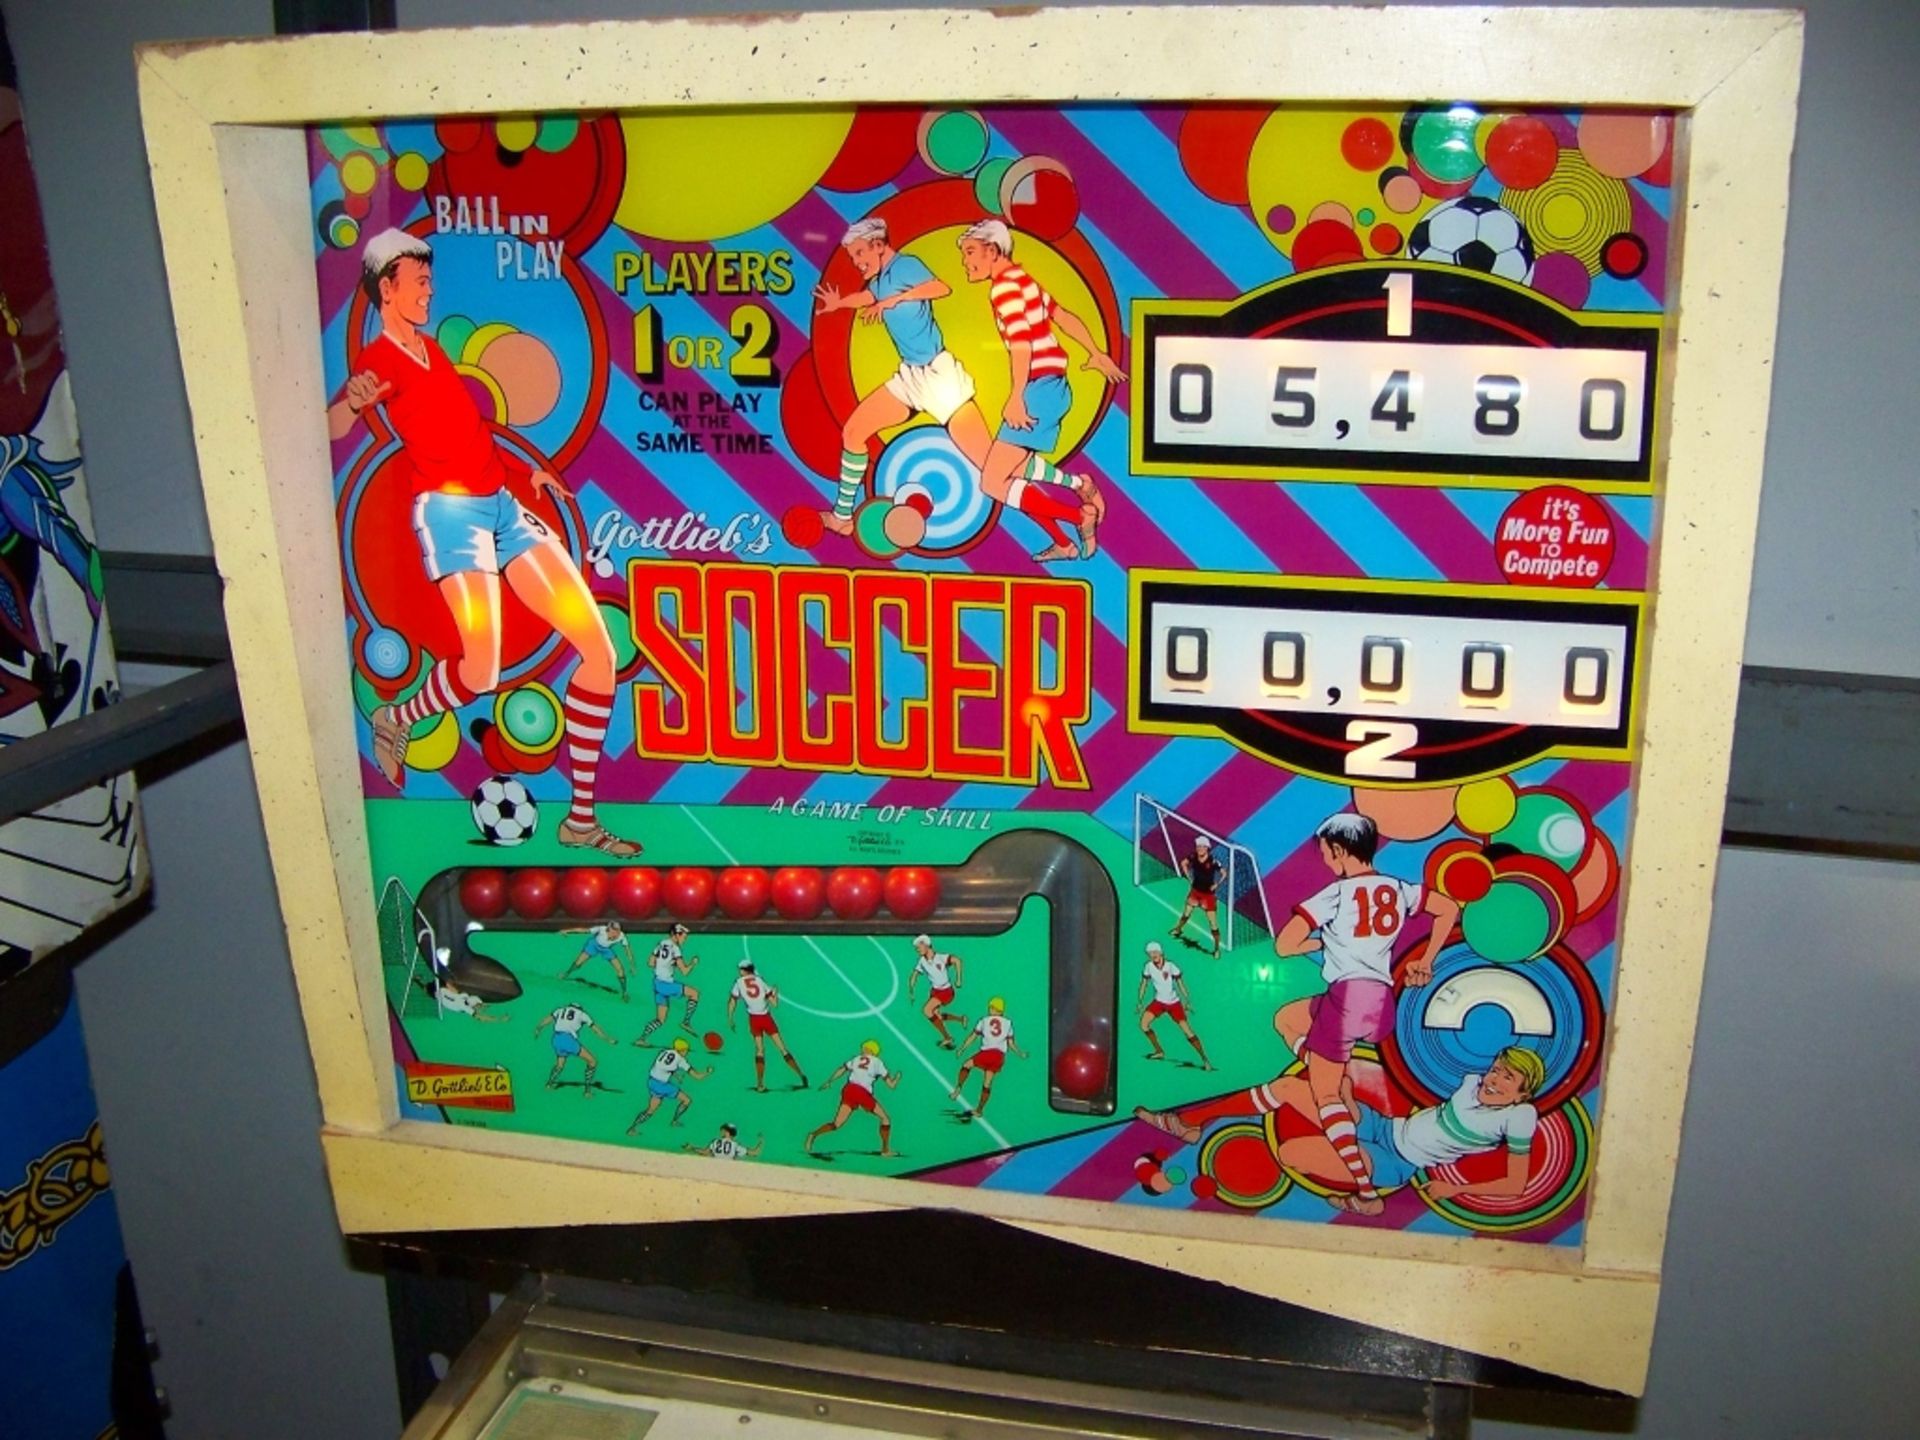 SOCCER PINBALL MACHINE ANIMATED BOX GOTTLIEB 1975 Item is in used condition. Evidence of wear and - Image 6 of 8